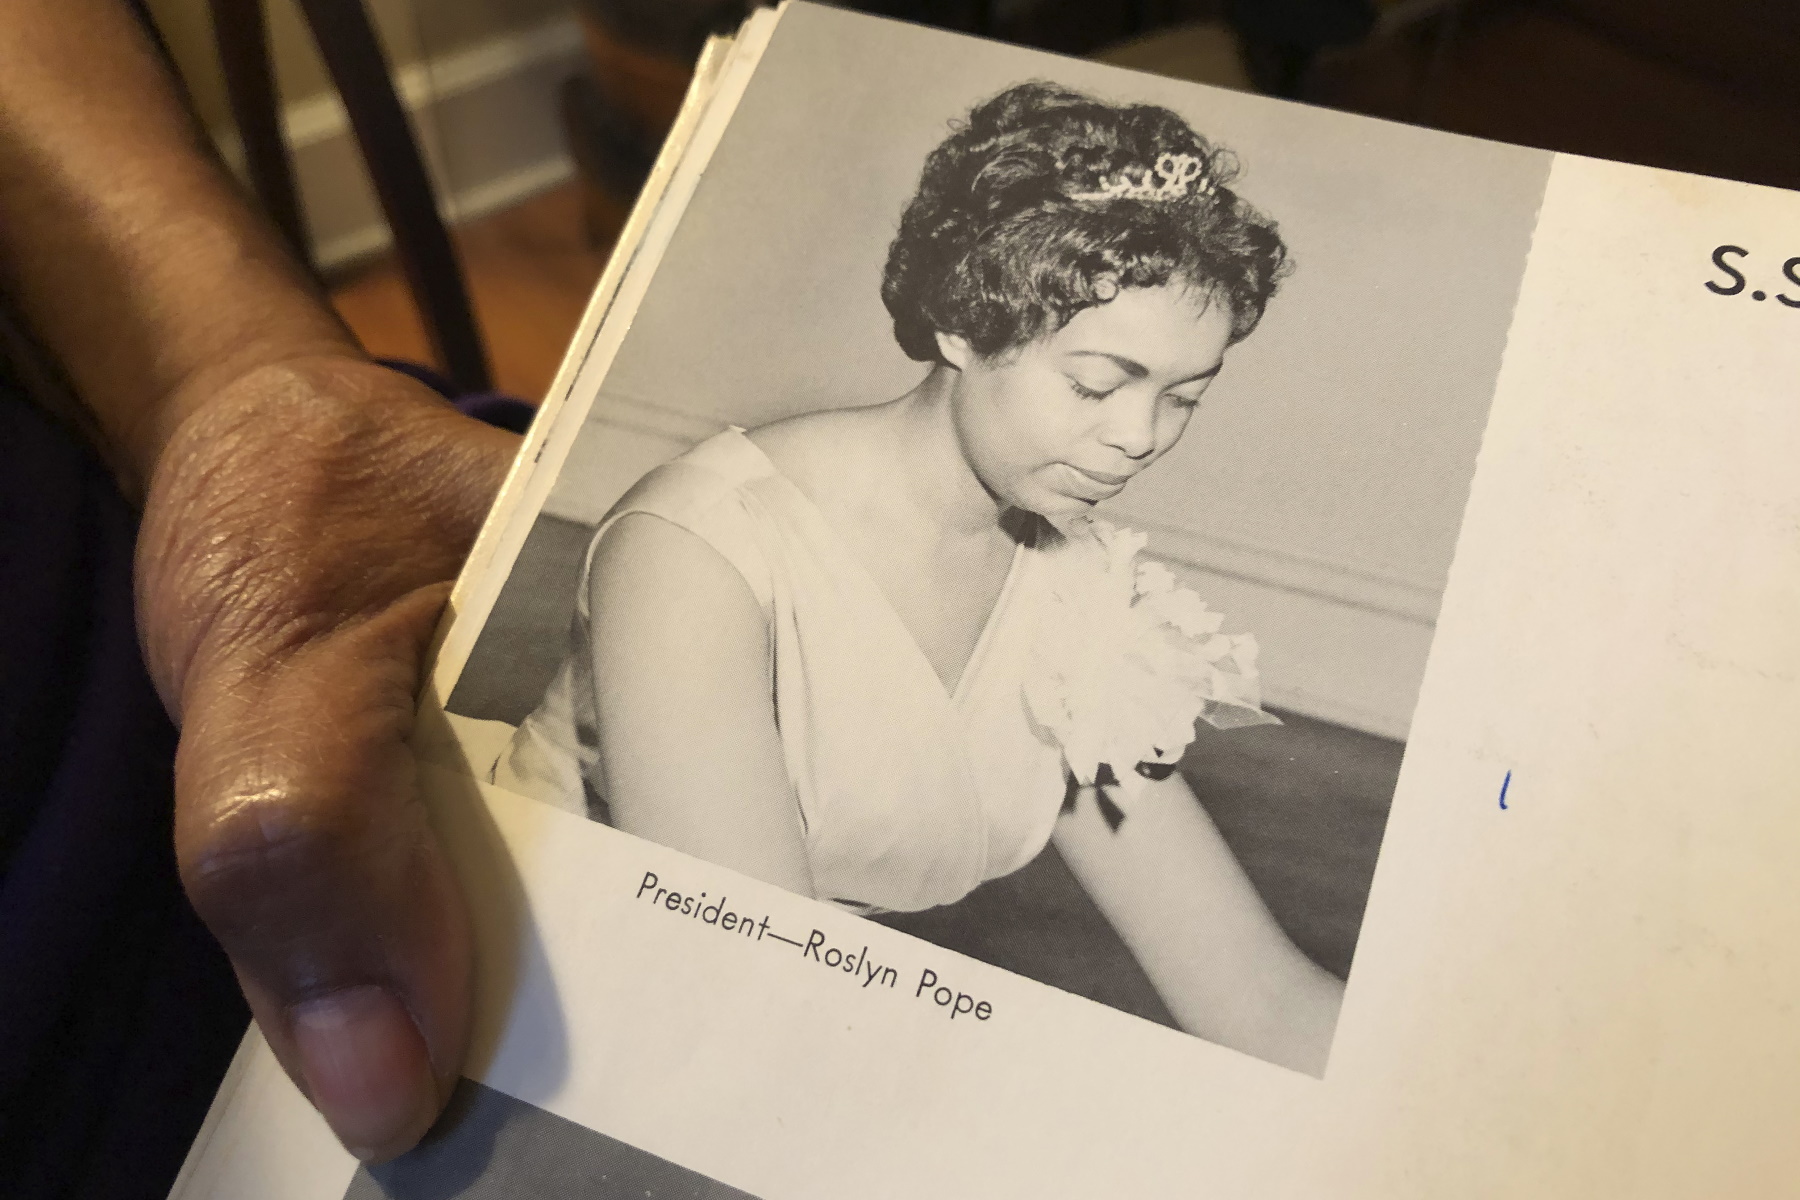 Roslyn Pope shows her Spelman College yearbook at her home in Atlanta. As a 21-year-old Spelman senior in March 1960, Pope wrote "An Appeal for Human Rights," a document that made the case for the Atlanta Student Movement, a nonviolent campaign of boycotts and sit-ins by black college students who protested racial segregation in education, jobs, housing, voting, hospitals, movies, concerts, restaurants and law enforcement. (Michael Warren/Associated Press)